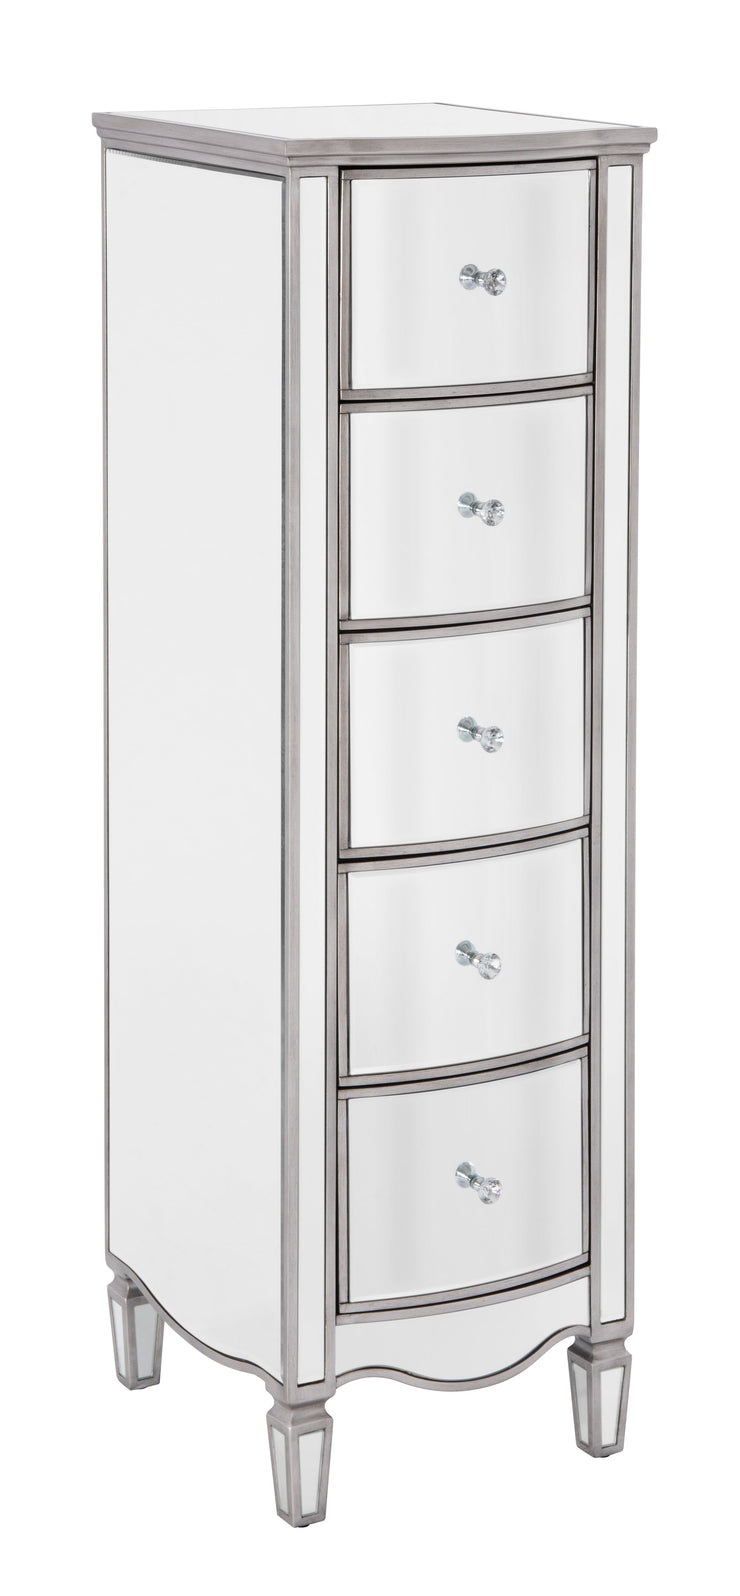 Elysee 5 Drawer Narrow Chest Of Drawers